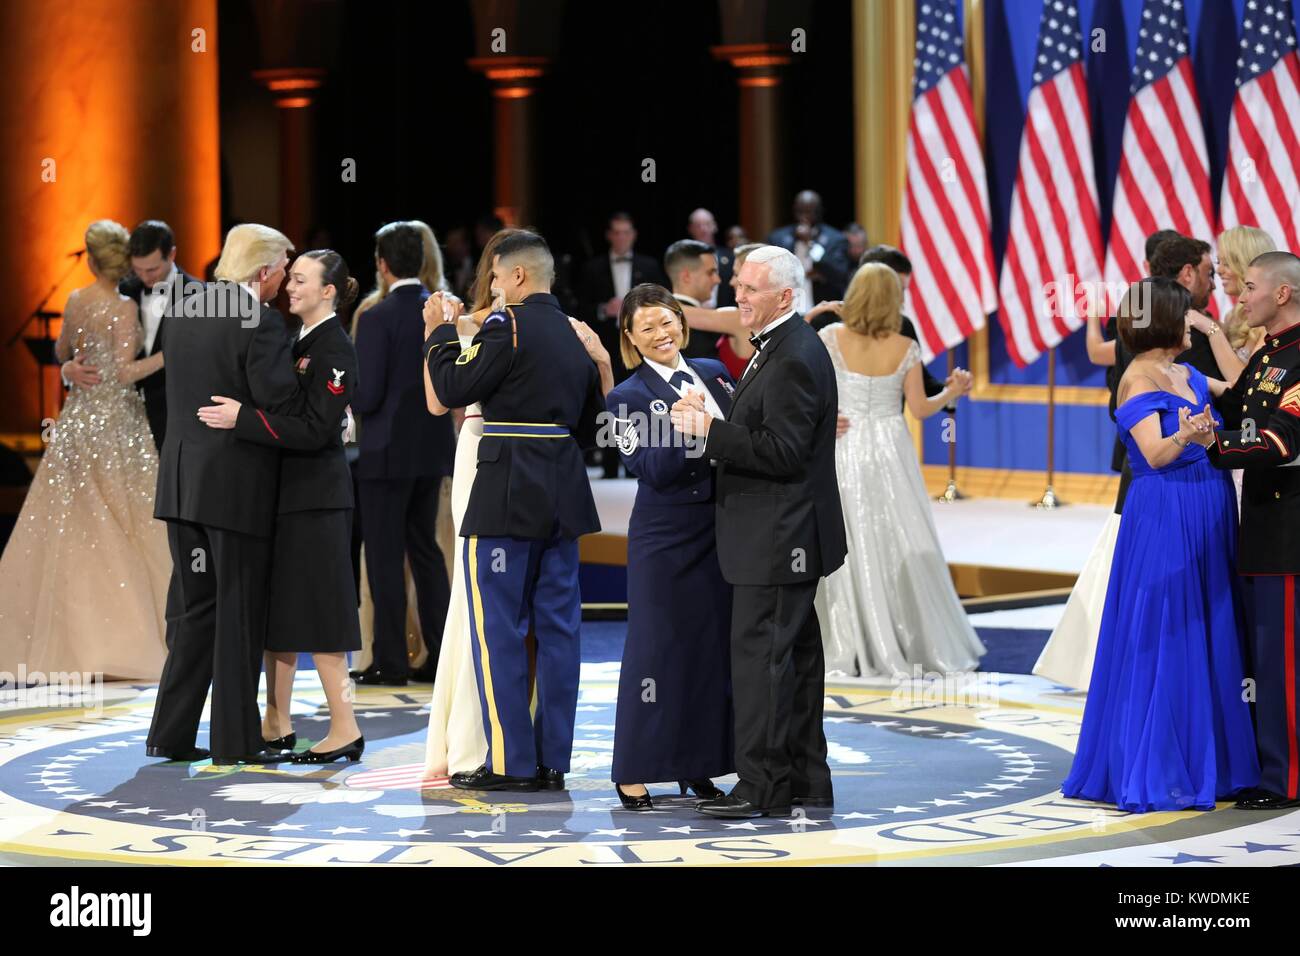 President Donald Trump, VP Mike Pence, and wives dance with the military and first responders. They are at the Salute to Our Armed Services Ball at the National Building Museum in Washington, D.C., Jan. 20, 2017 (BSLOC 2017 18 126) Stock Photo